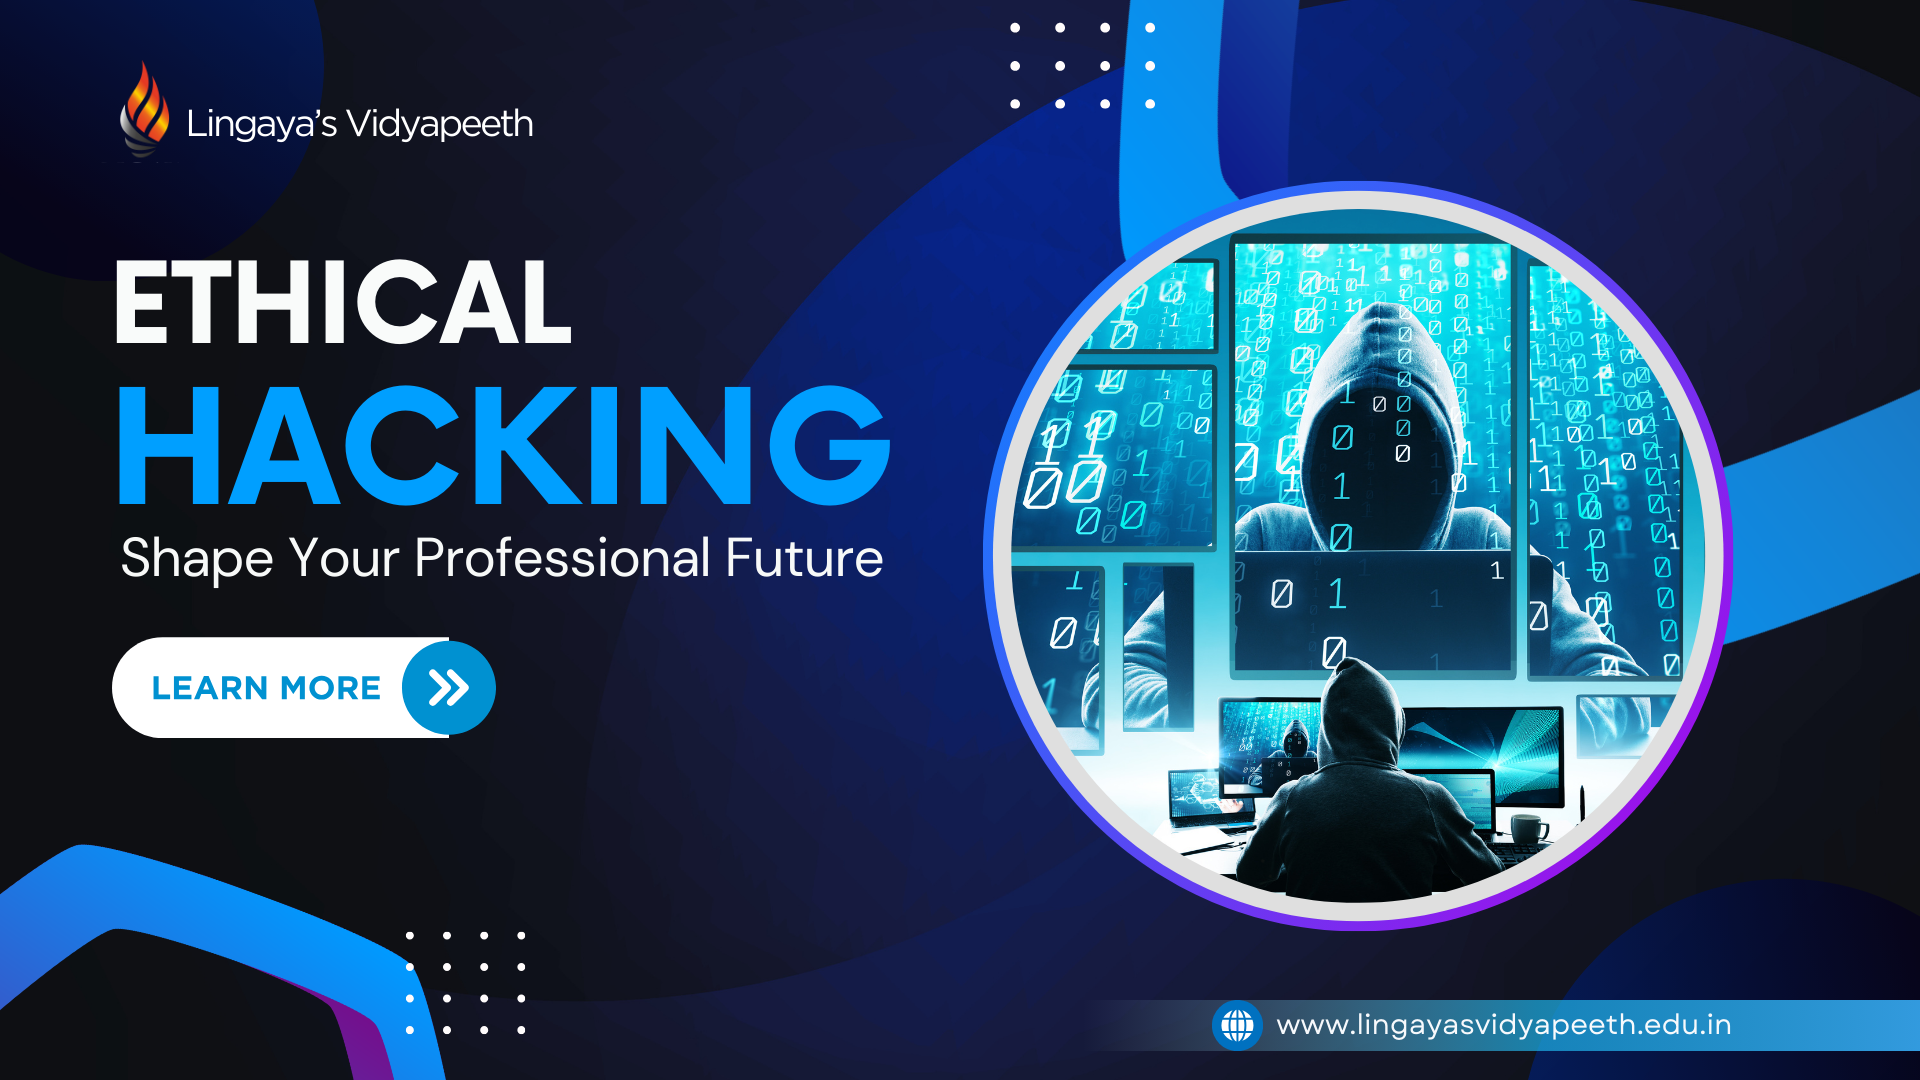 How Can Ethical Hacking Shape Your Professional Future?